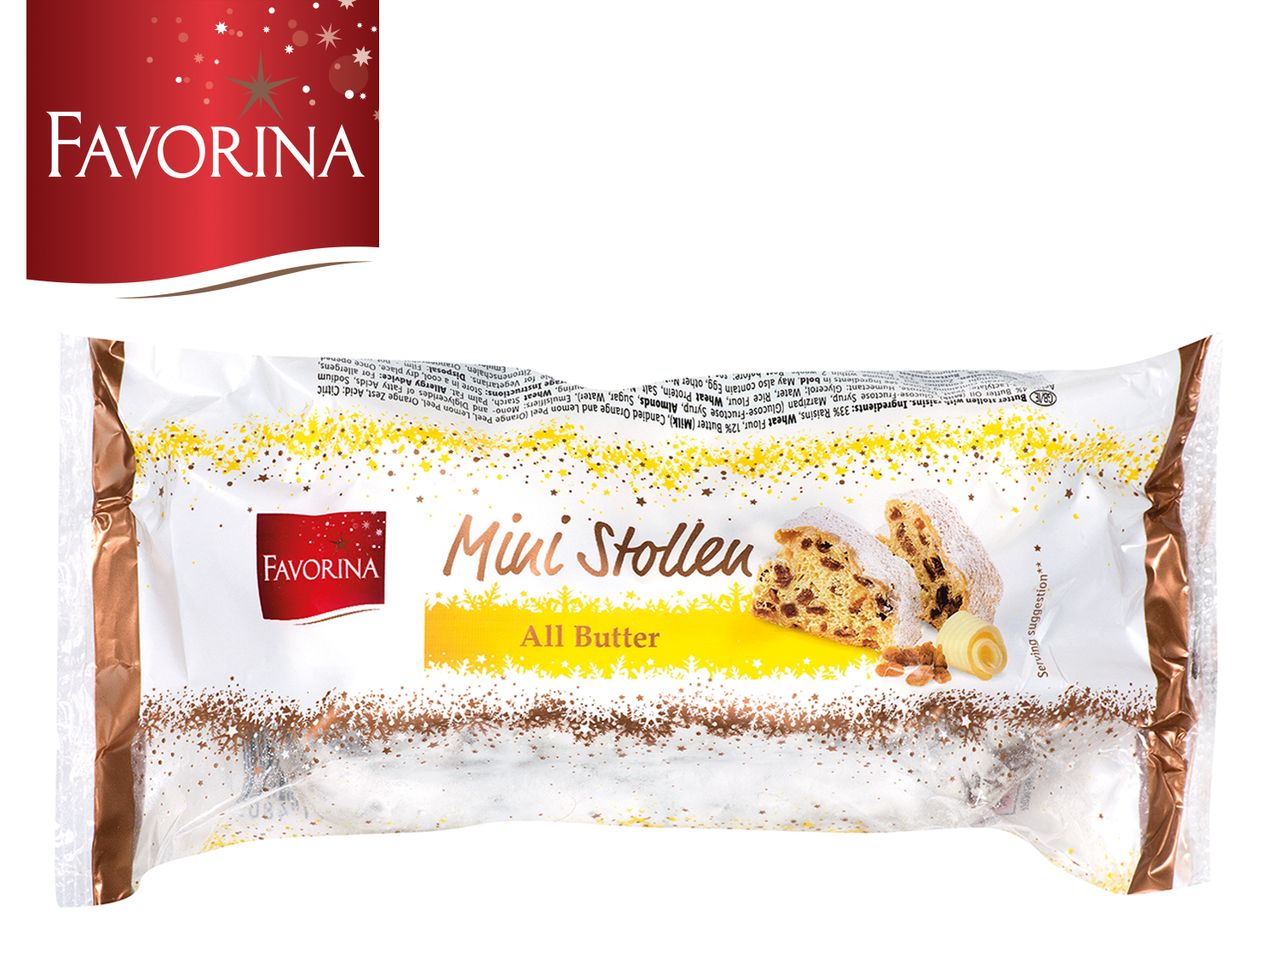 Go to full screen view: Favorina All Butter Mini Stollen - Image 1